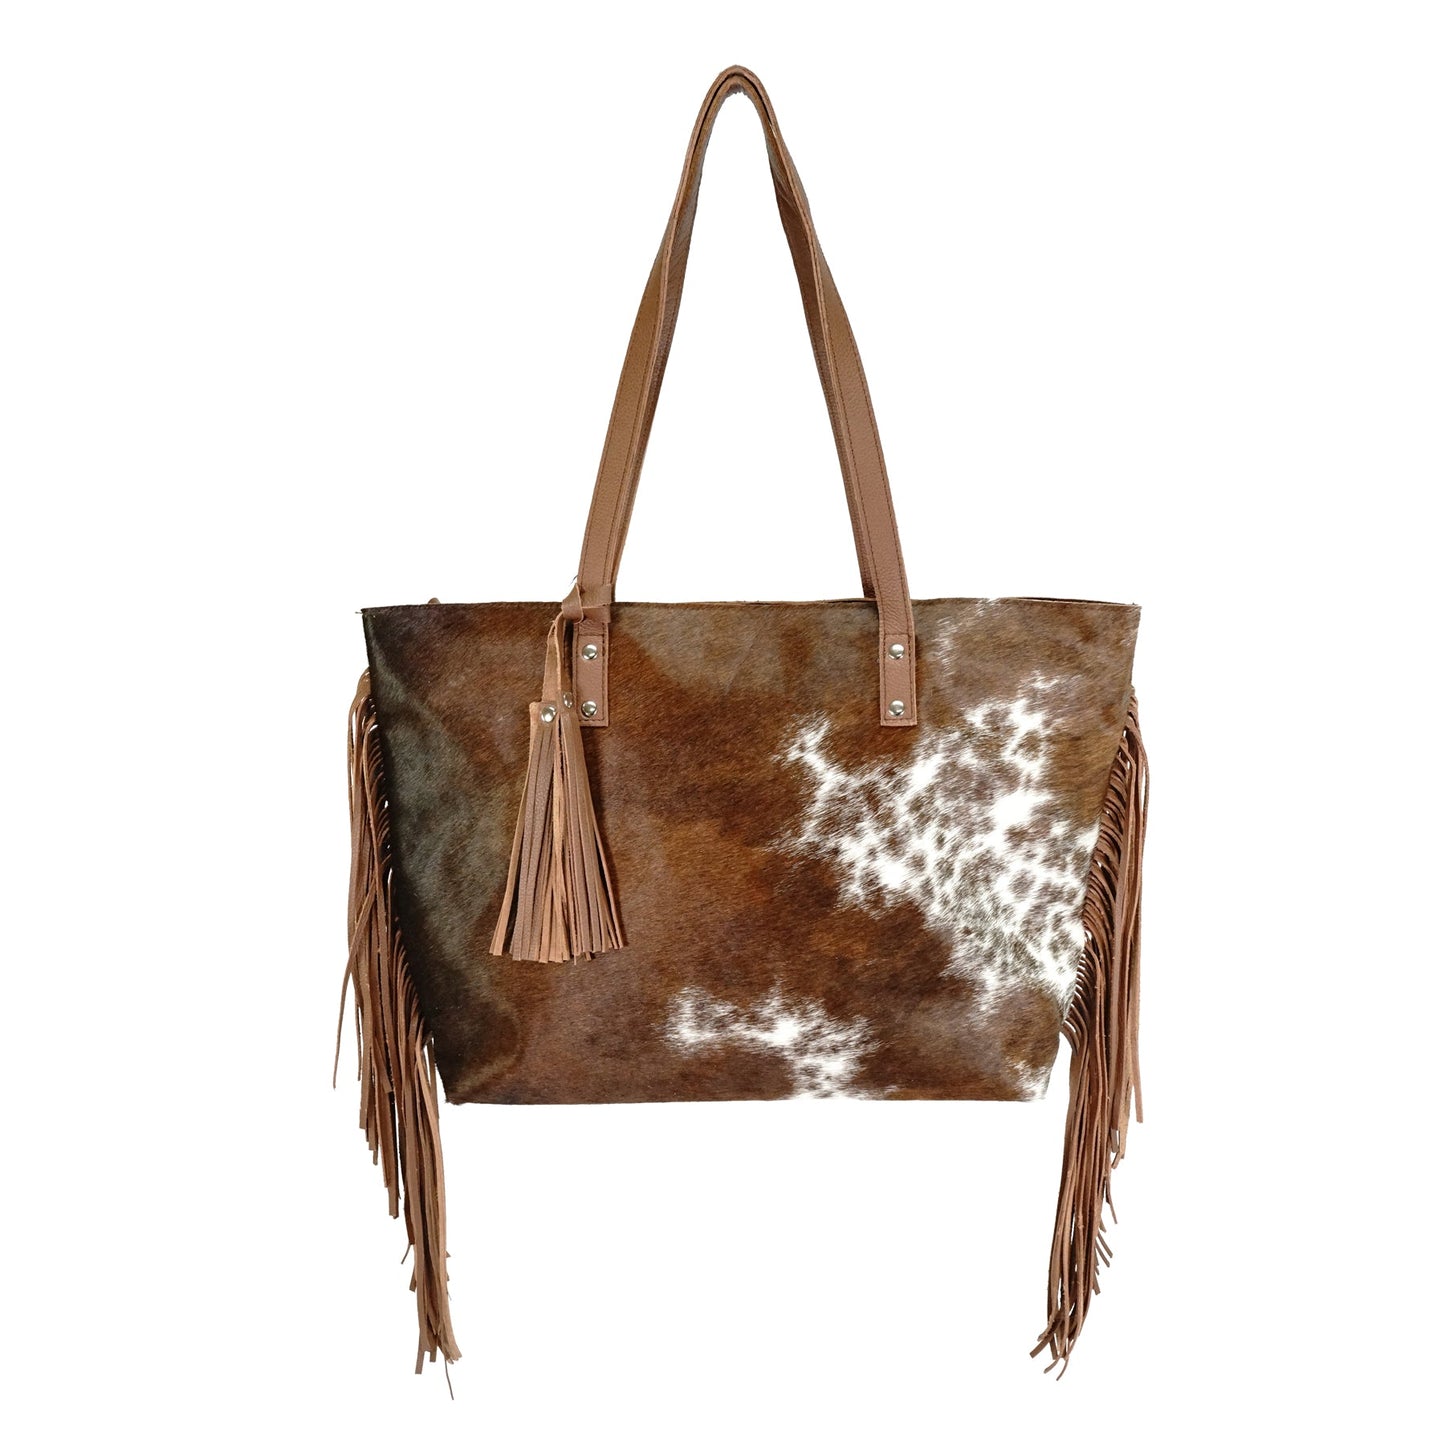 Genuine leather hair on cowhide women's shoulder bag with fringes - Rodeo Cowhide RugsBrown